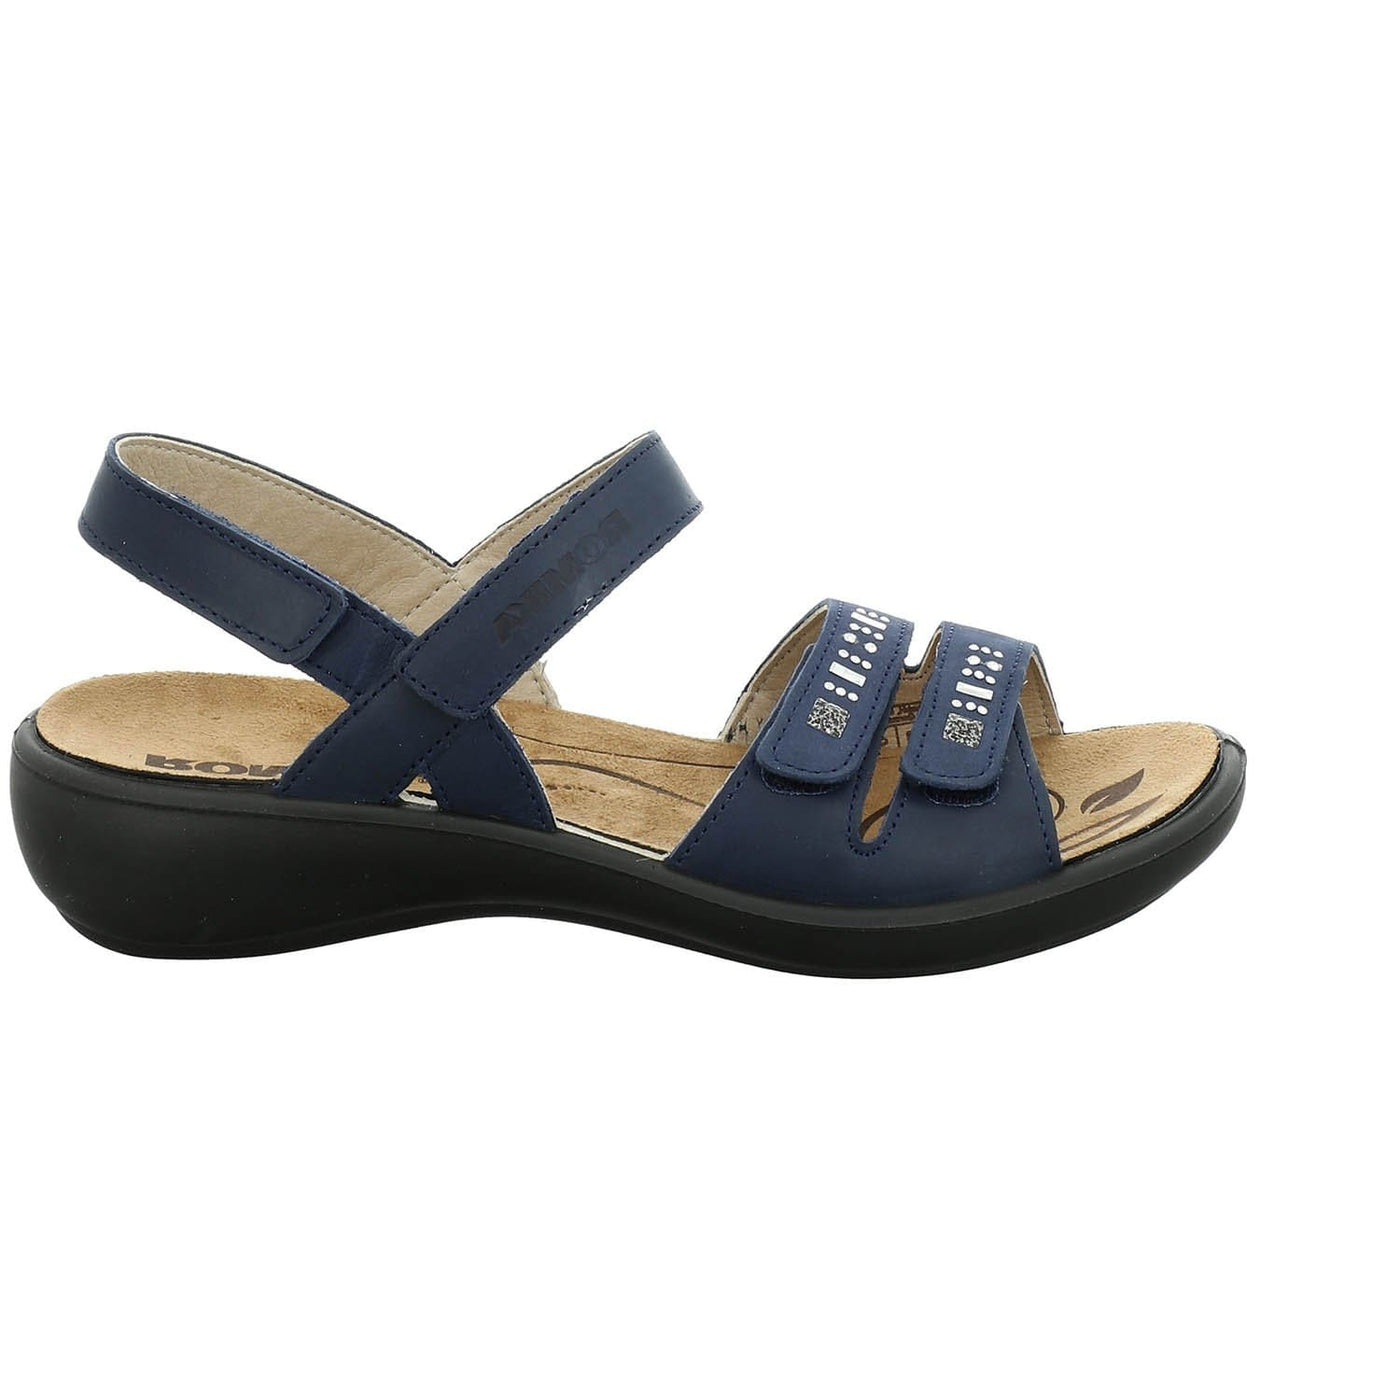 Romika Ibiza 86 | Chaussures confortables - Sandales dame